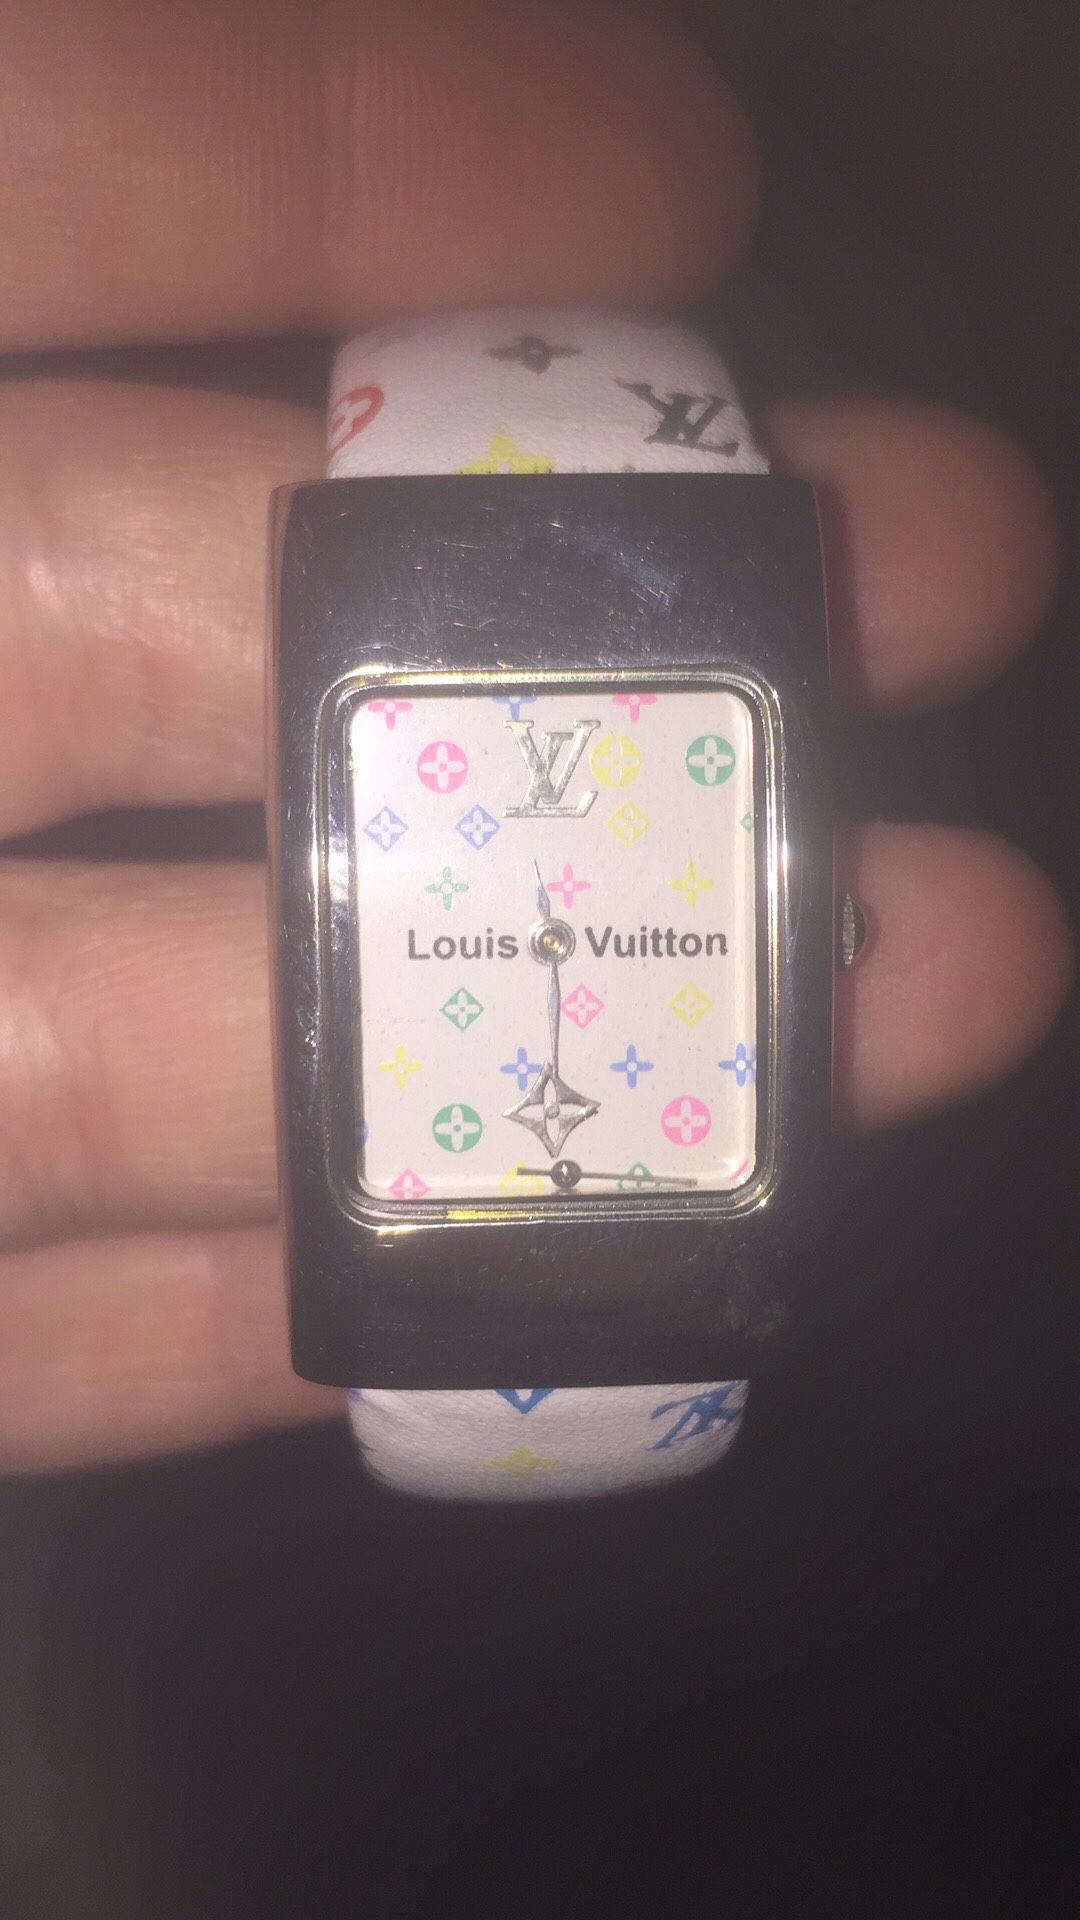 LV Louis Vuitton Tambour Horizon Light Up Connected Watch In Black With  Strap for Sale in Lake Forest, CA - OfferUp